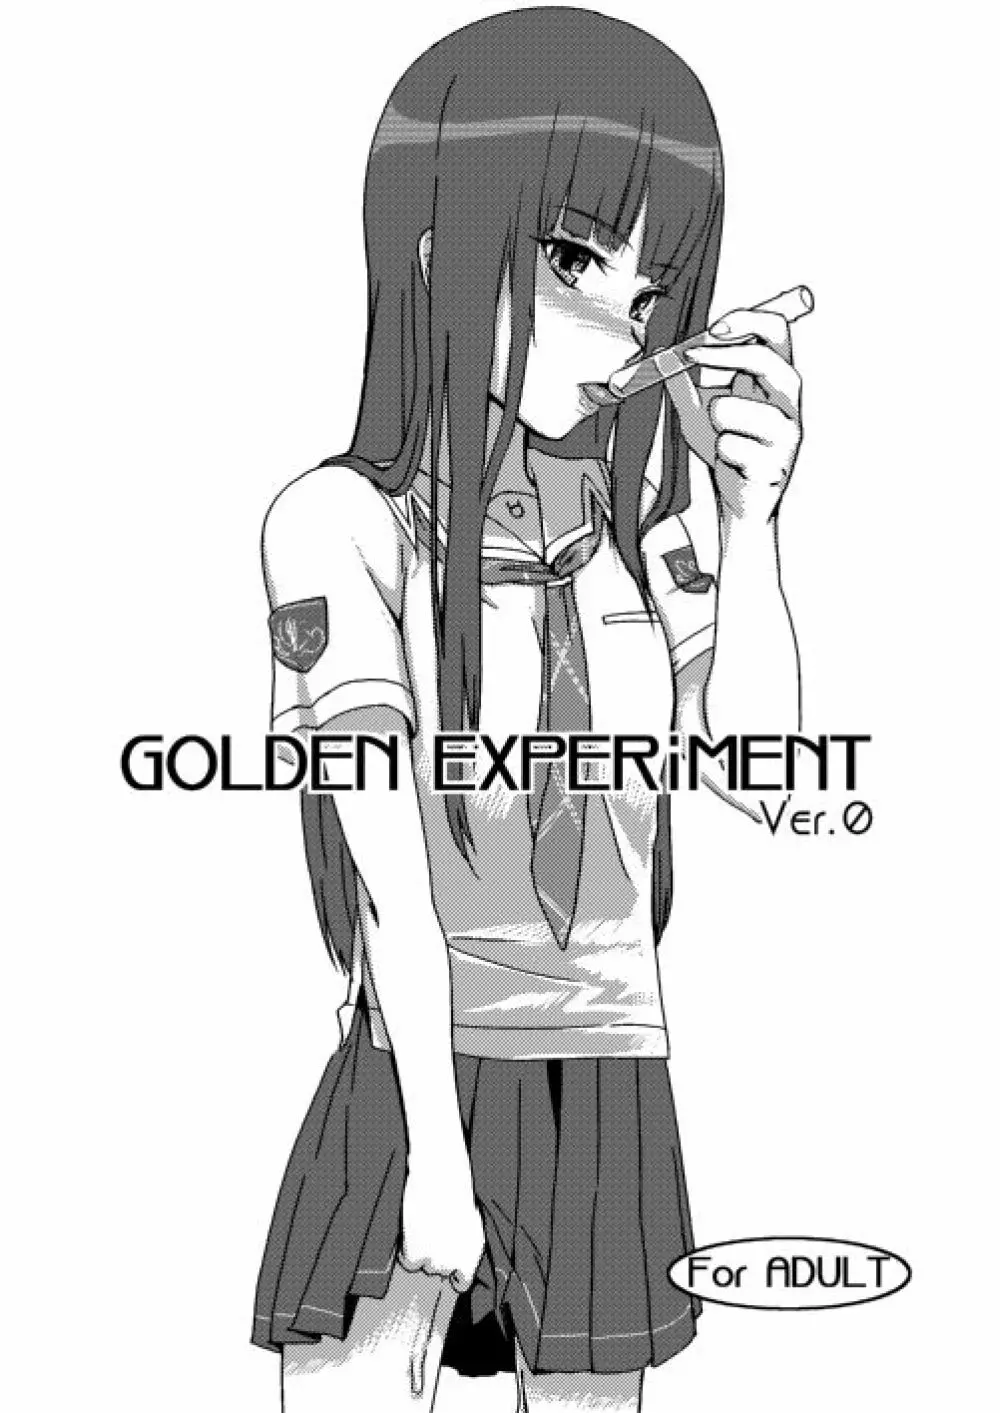 GOLDEN EXPERiMENT Ver.0 - page1